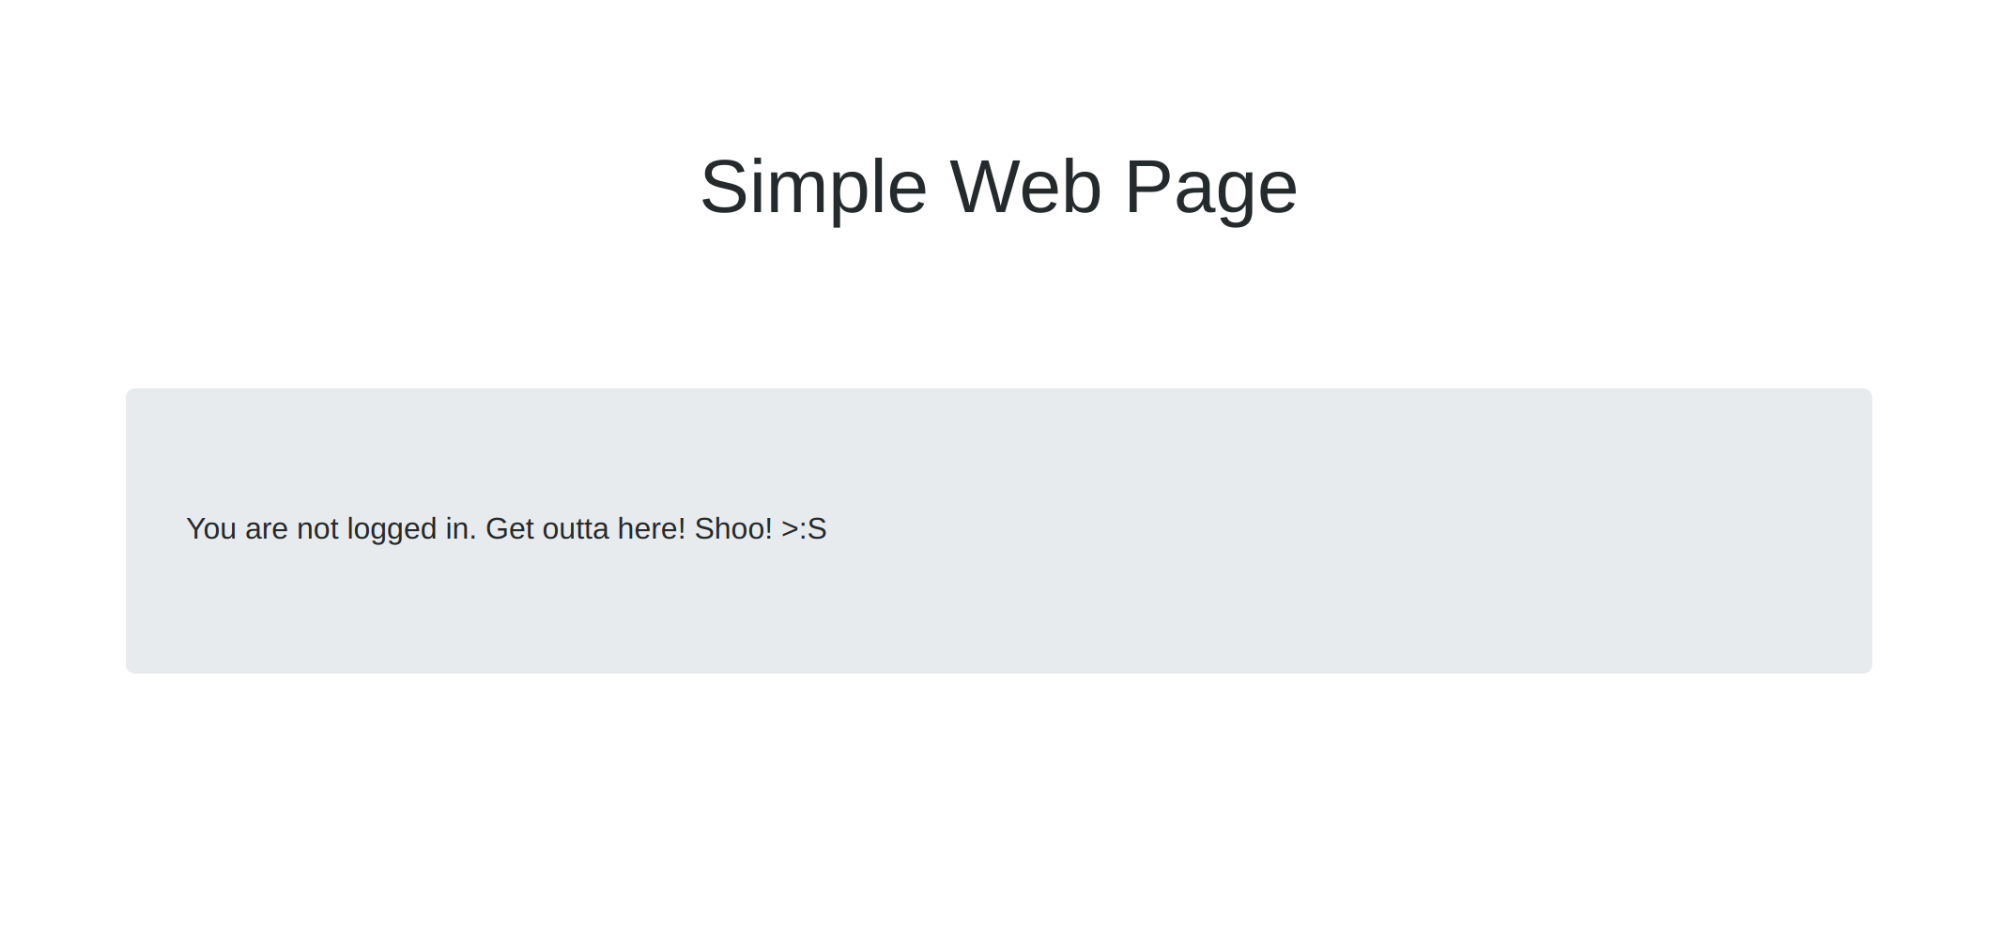 Simple Web Page